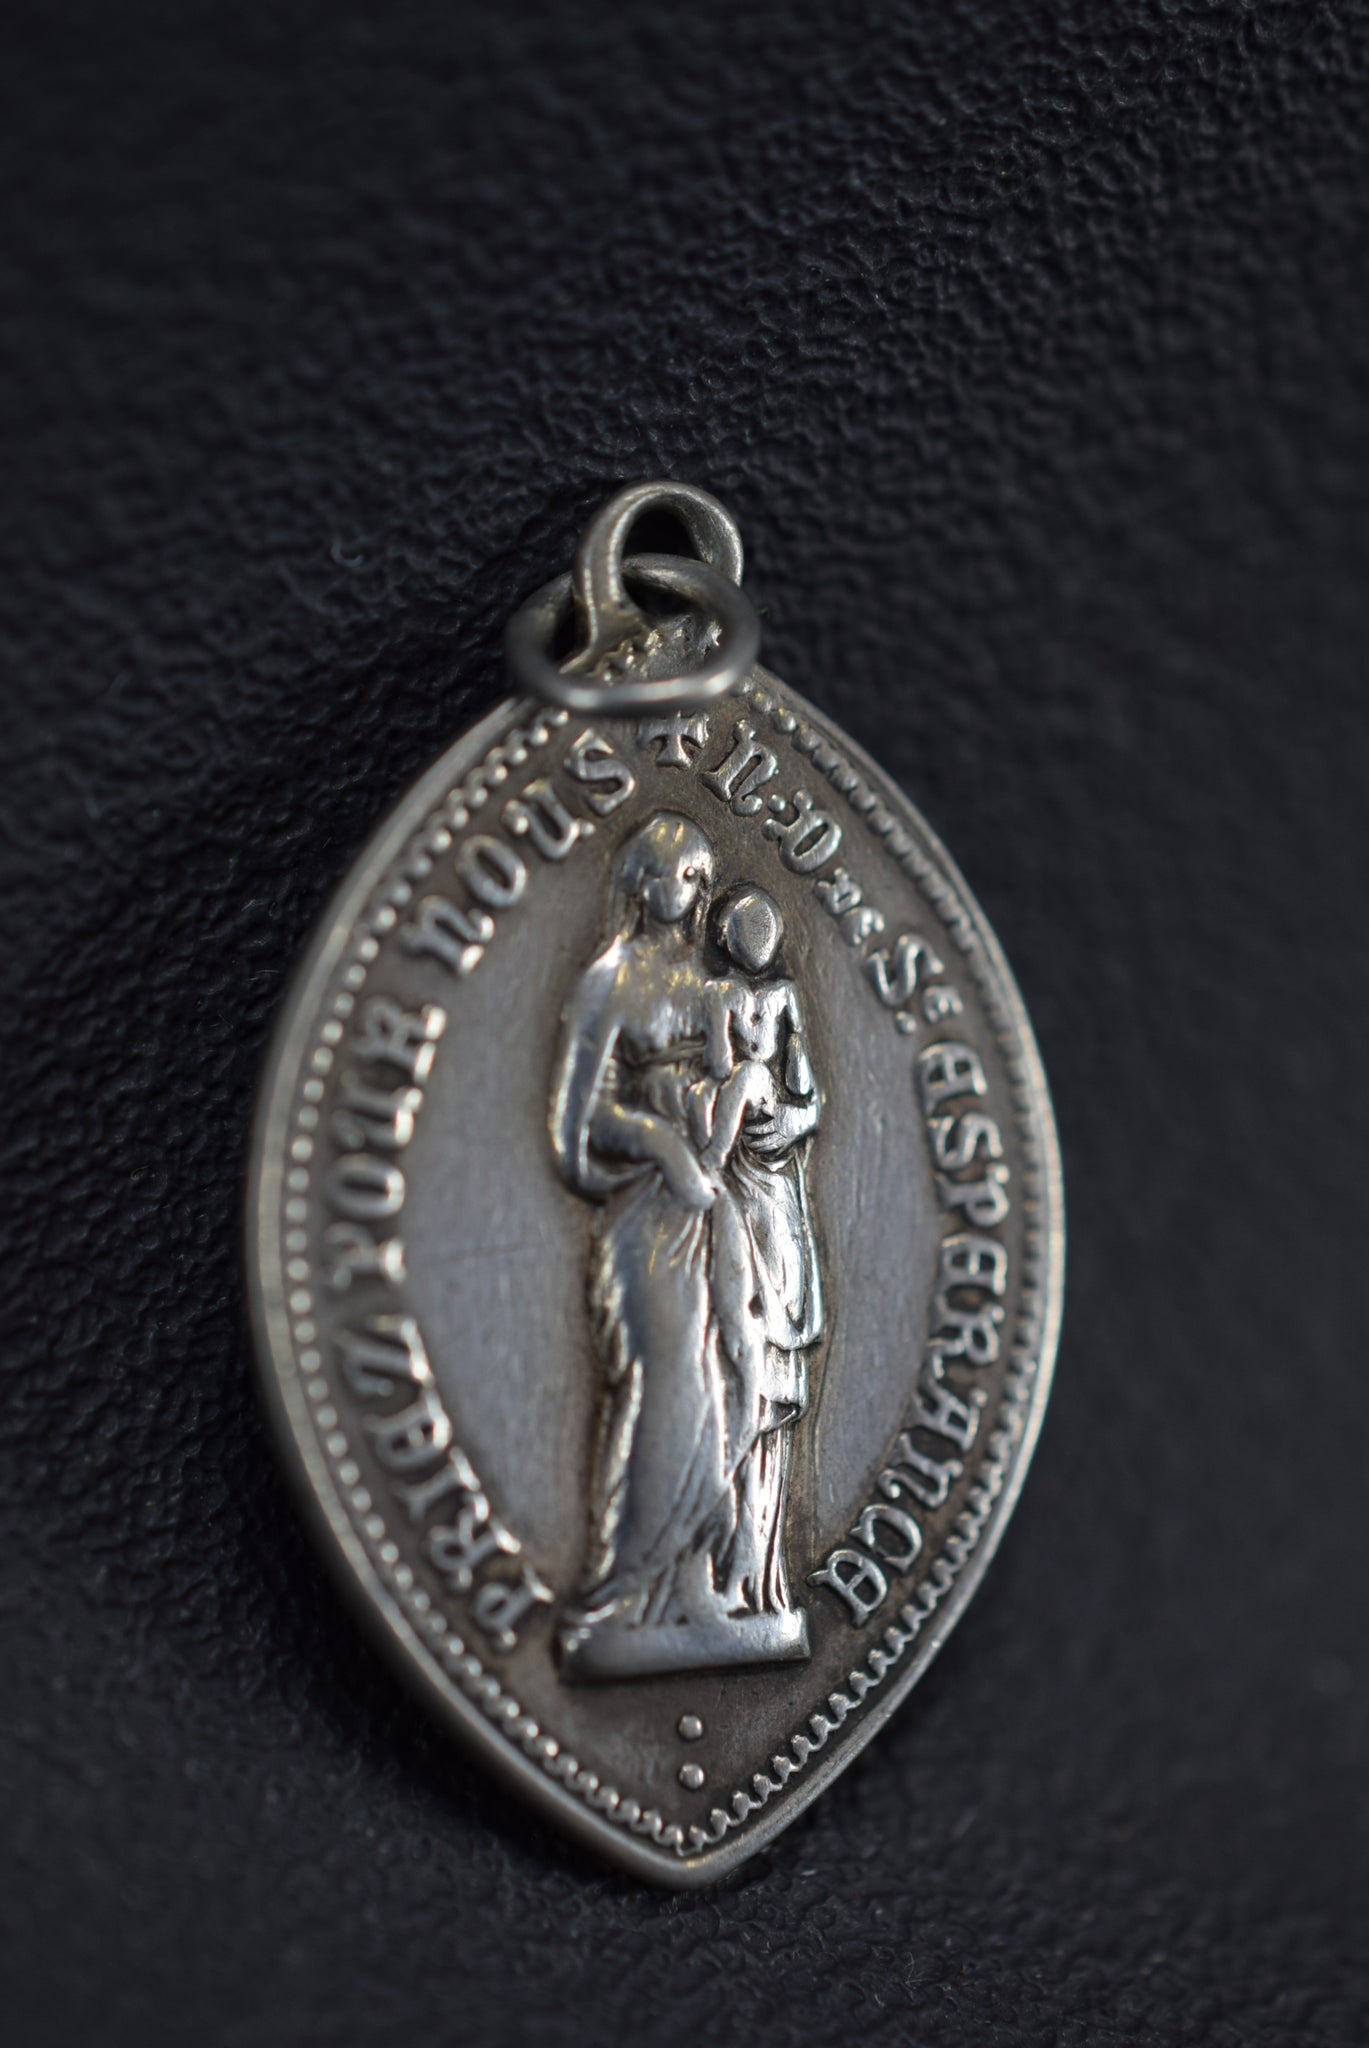 Our Lady of Hope Medal